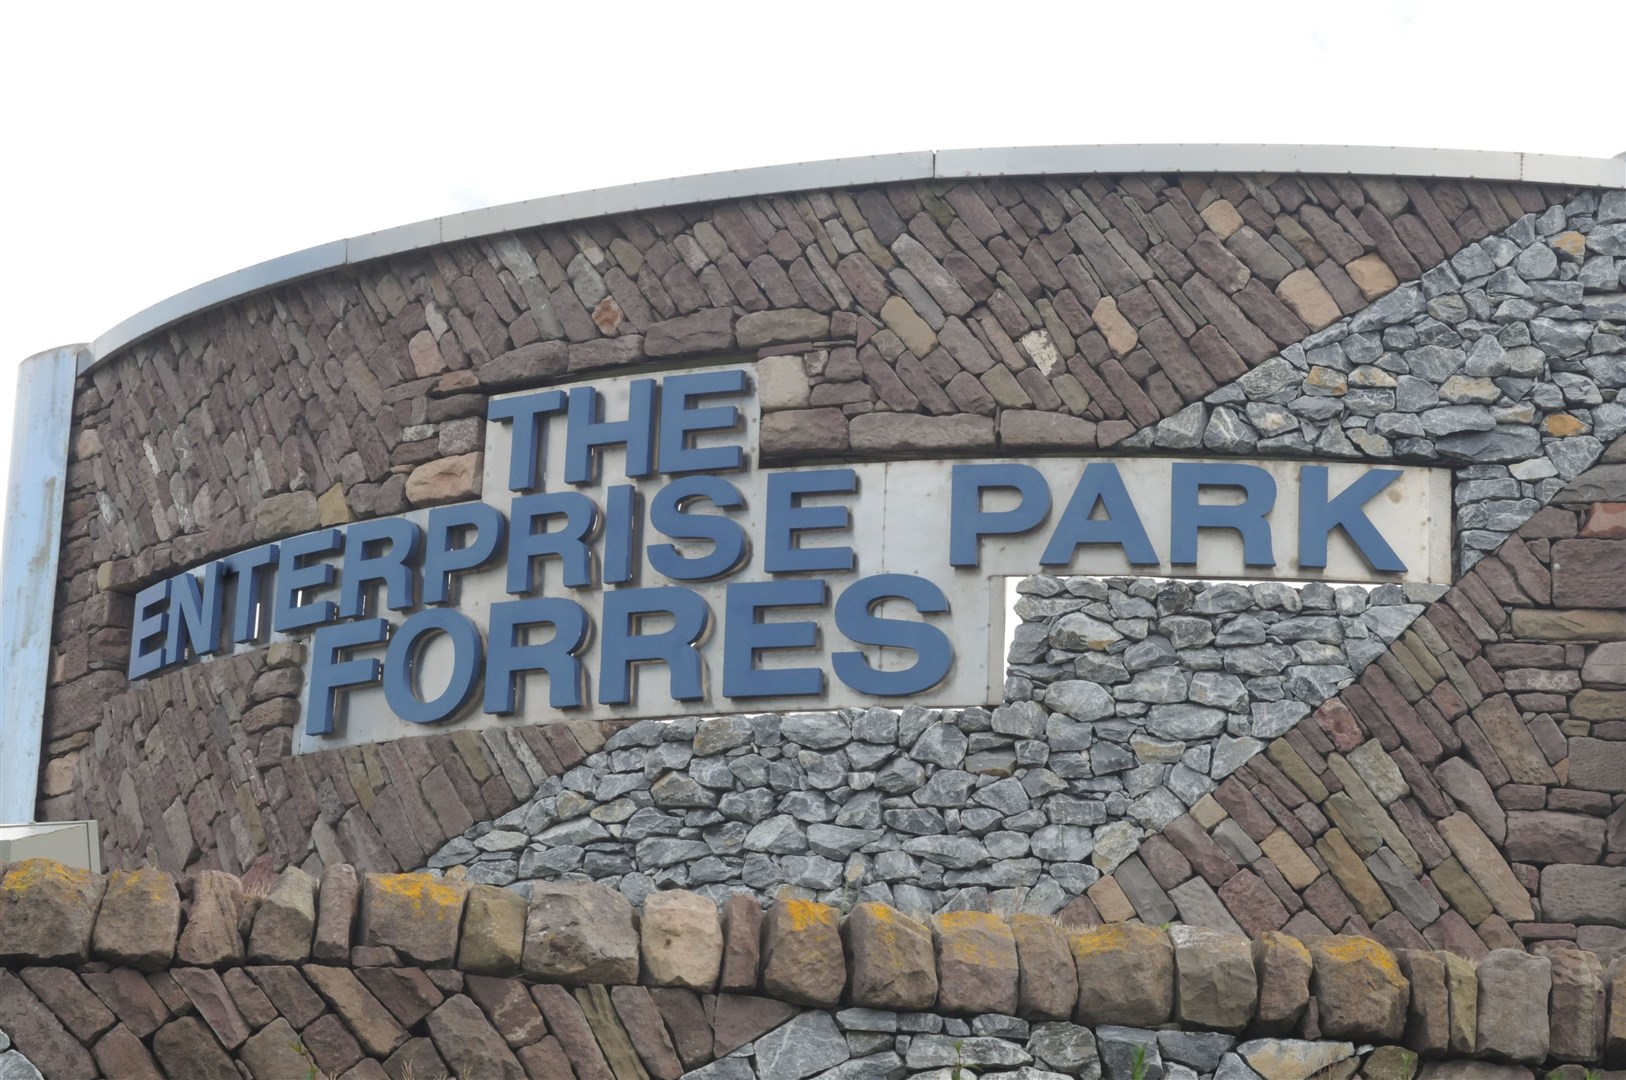 Forres Enterprise Park on the edge of the town.